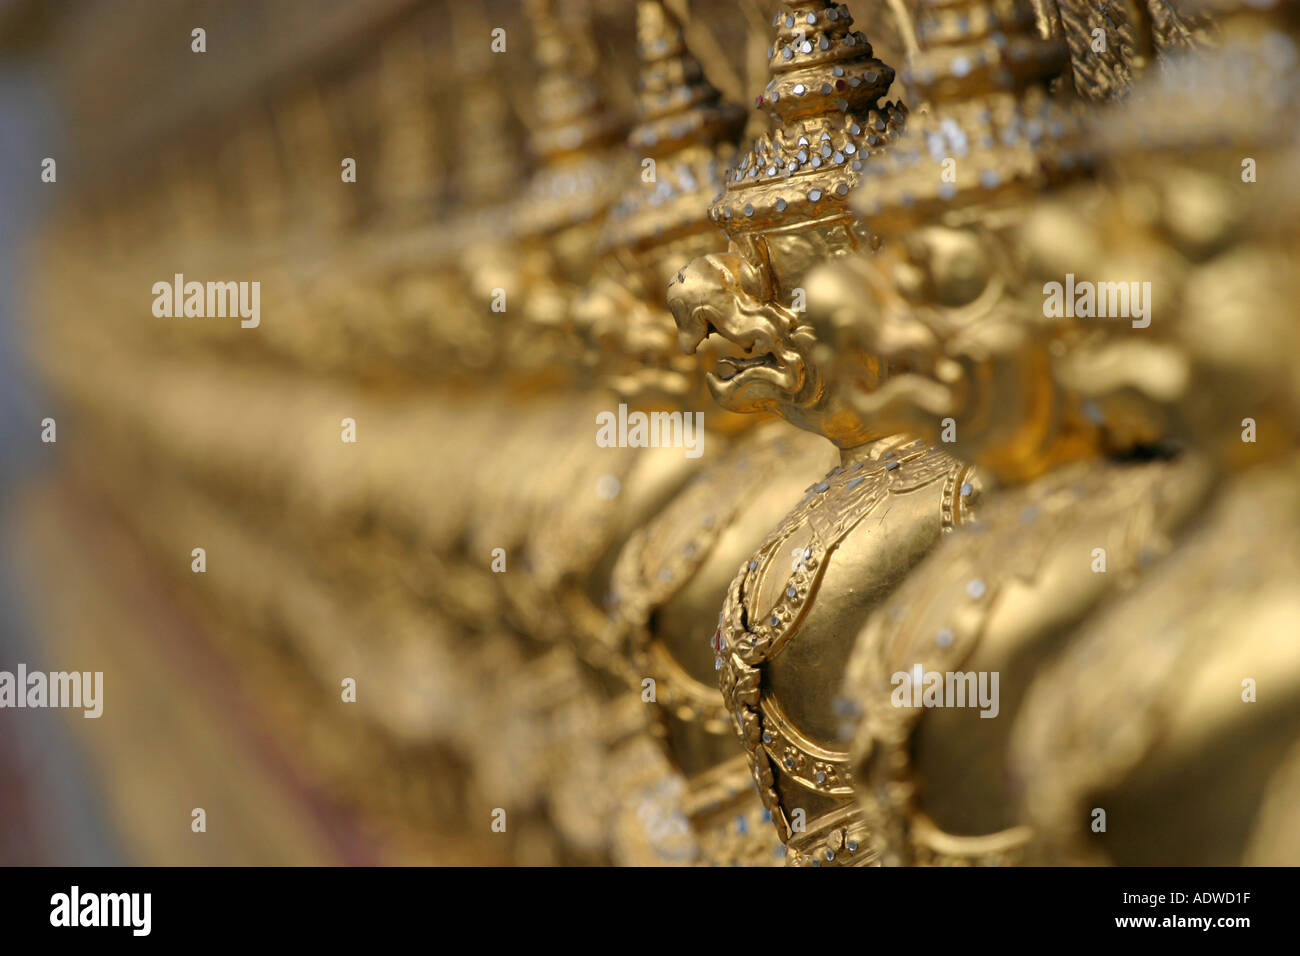 Golden guardian angel statues stand in a long row with shallow depth of field Grand Palace Bangkok Thailand Asia Stock Photo